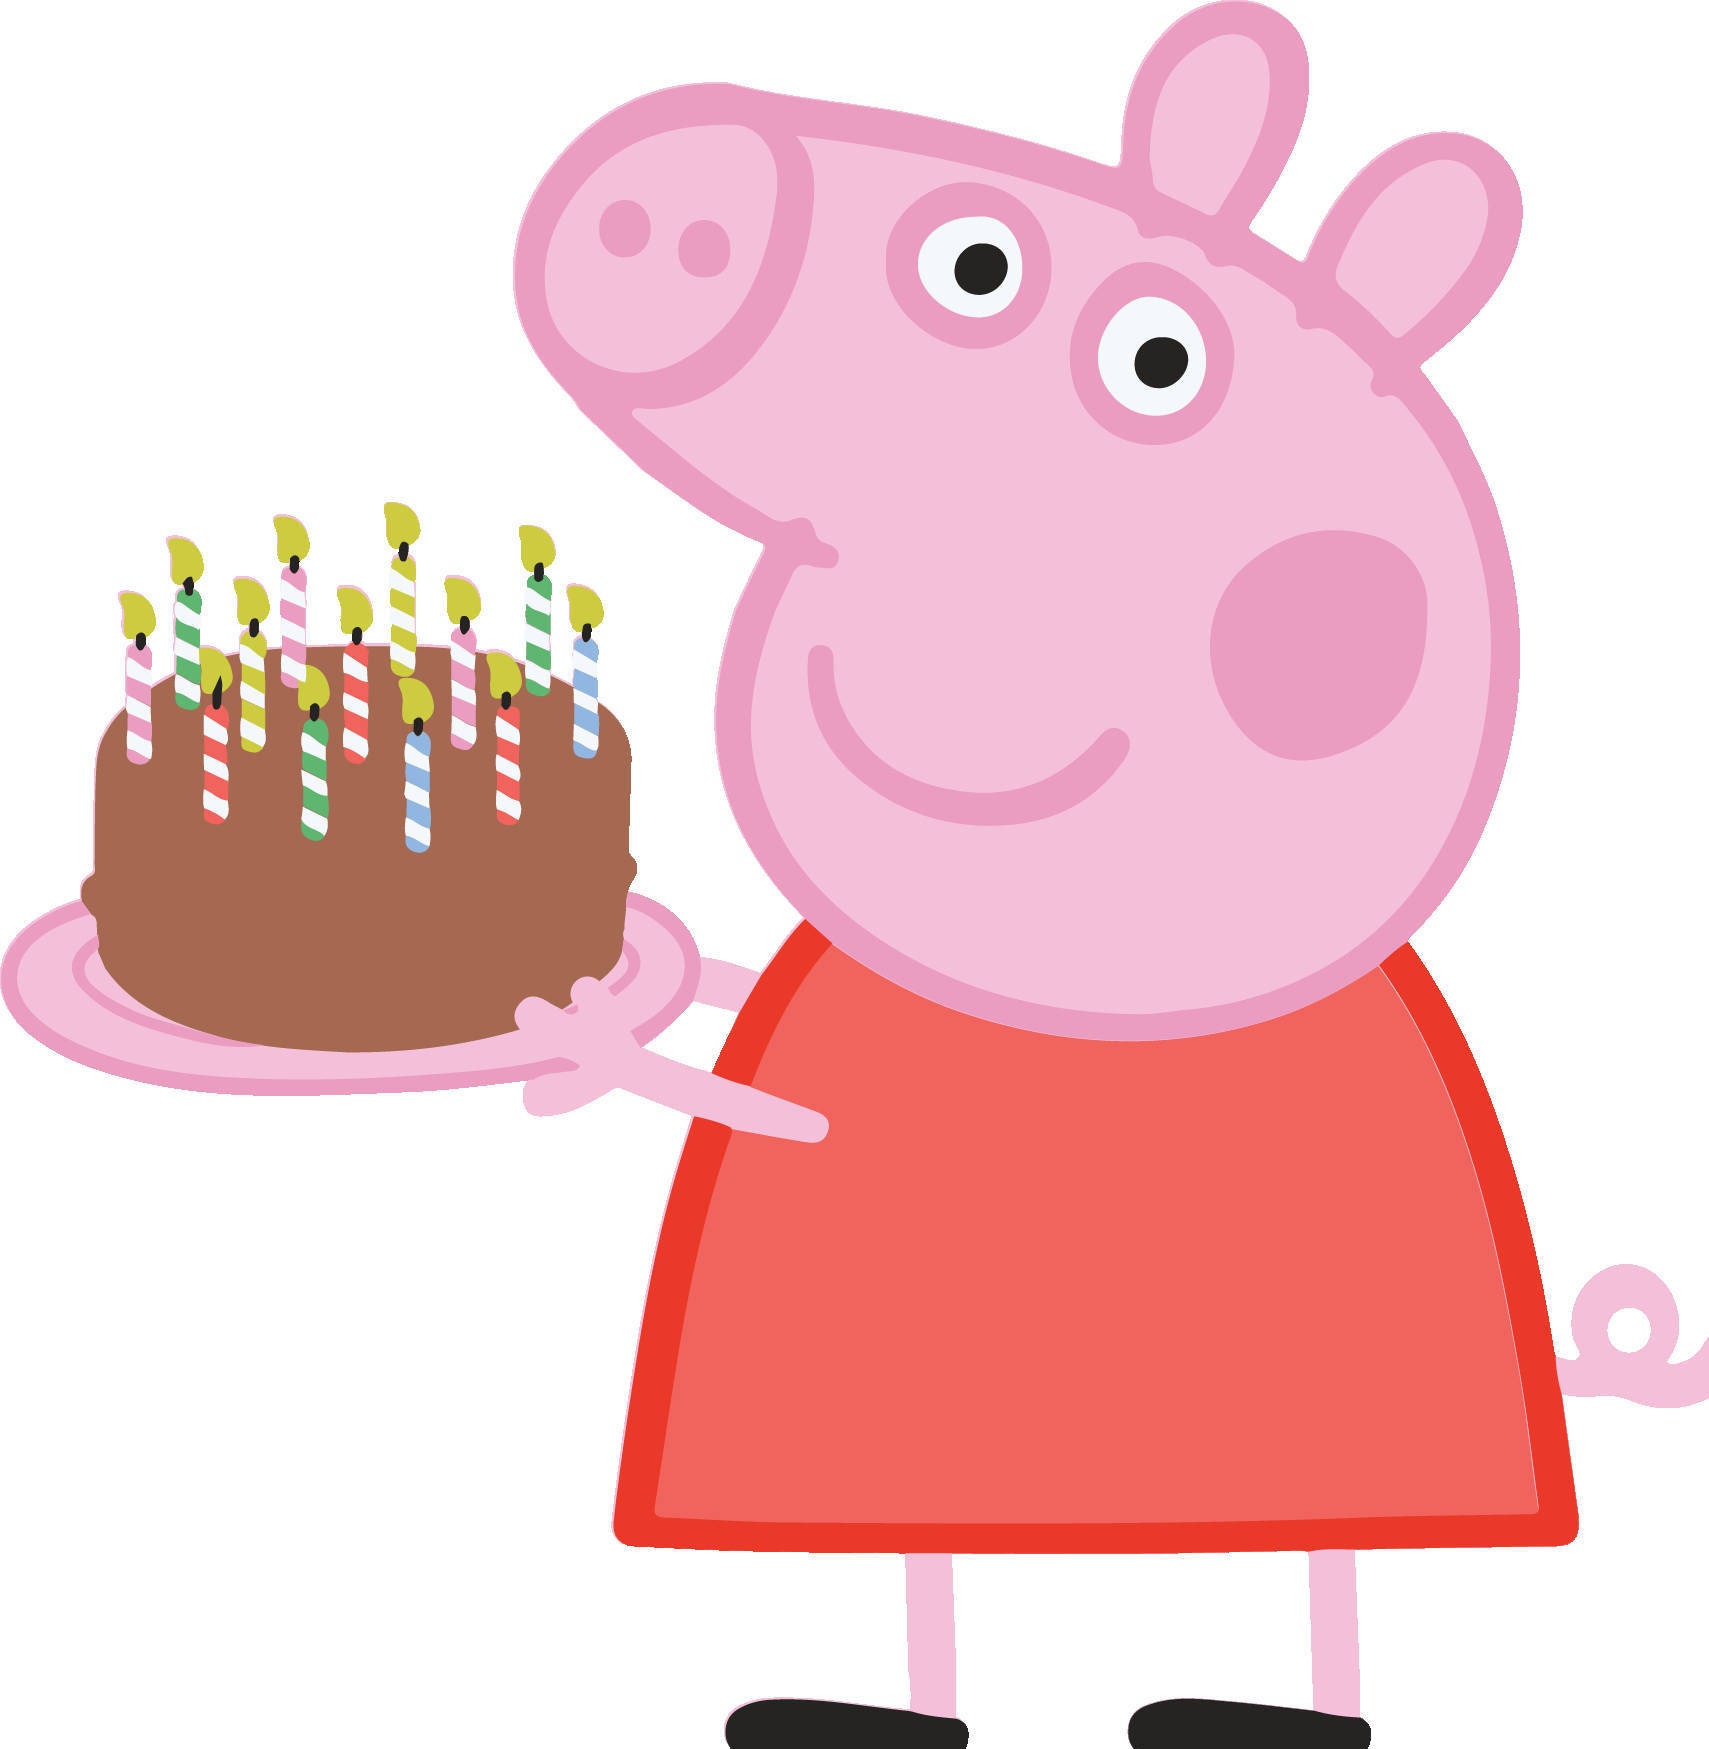 Download 30% off Peppa Pig birthday cake files for cutting and